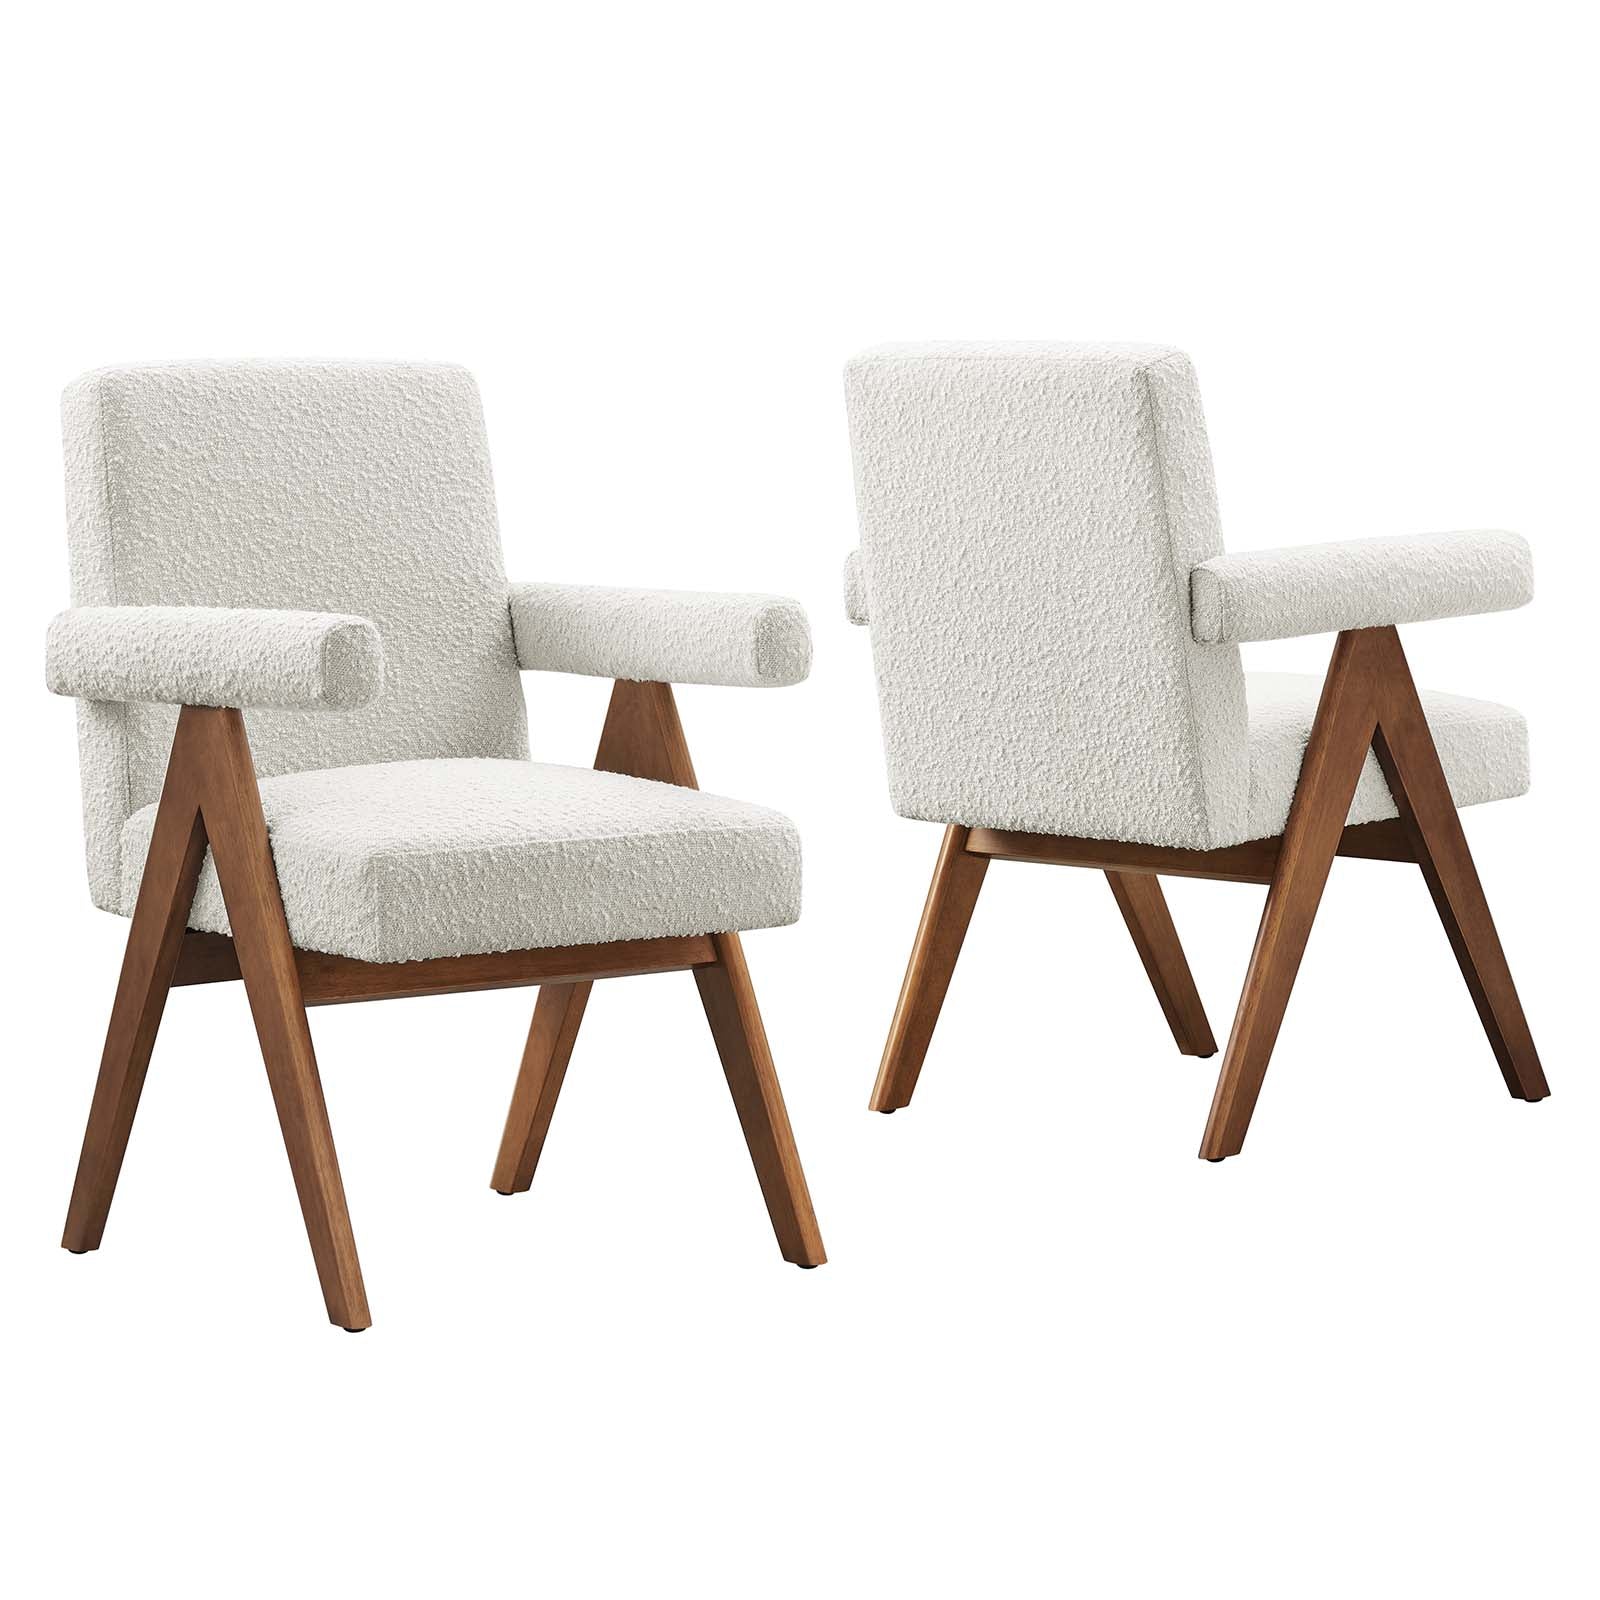 Lyra Boucle Fabric Dining Room Chair - Set of 2 - East Shore Modern Home Furnishings